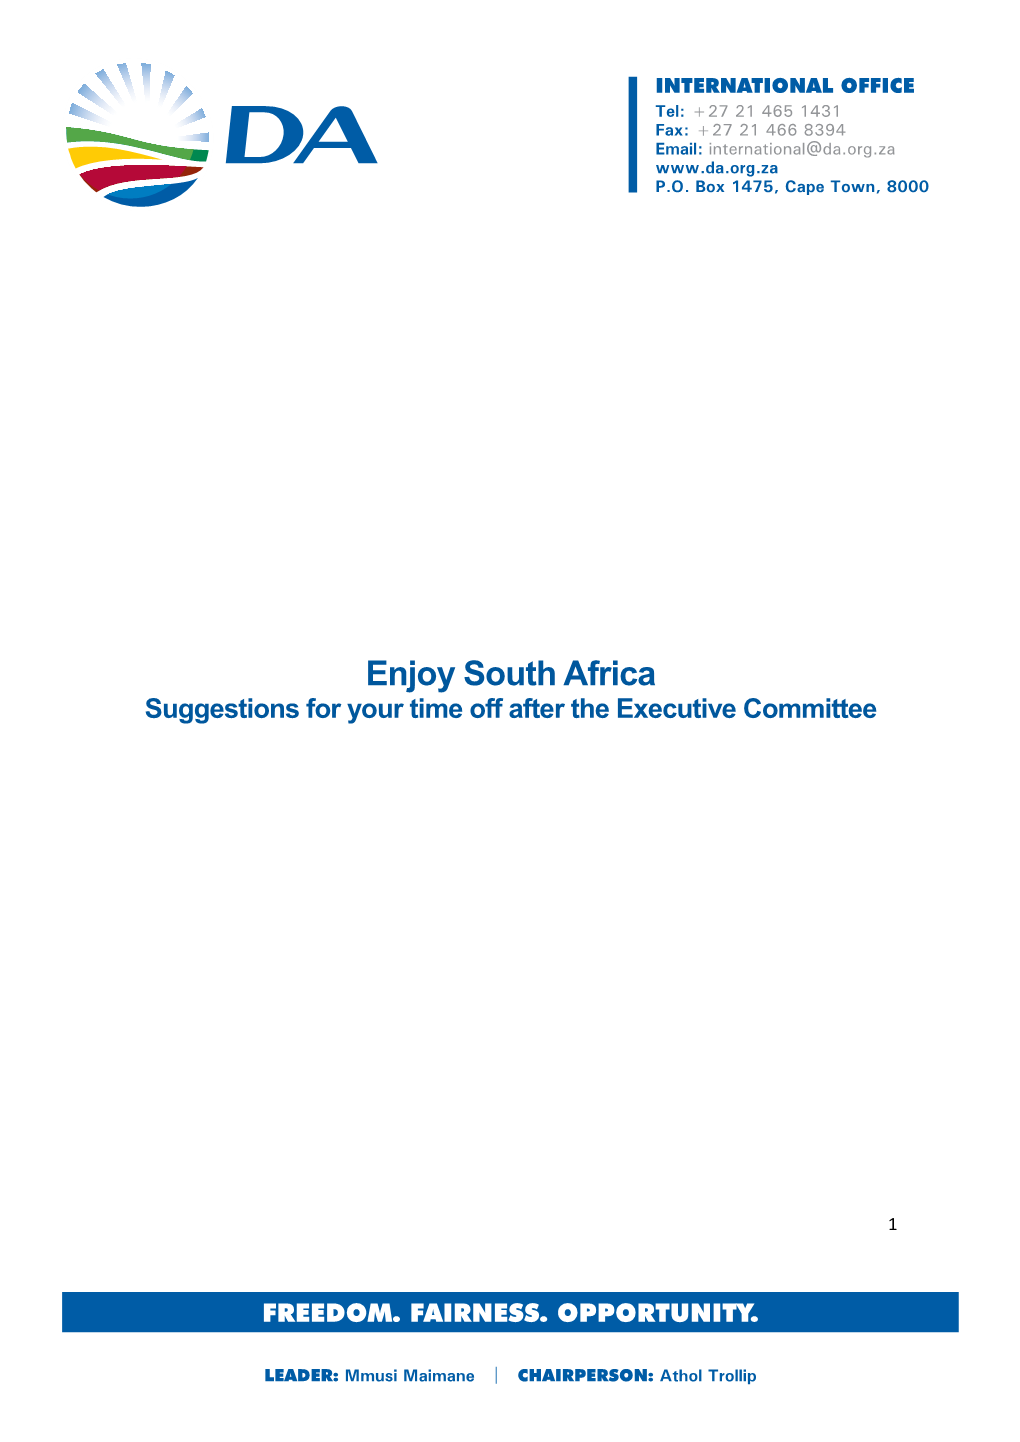 Enjoy South Africa Suggestions for Your Time Off After the Executive Committee